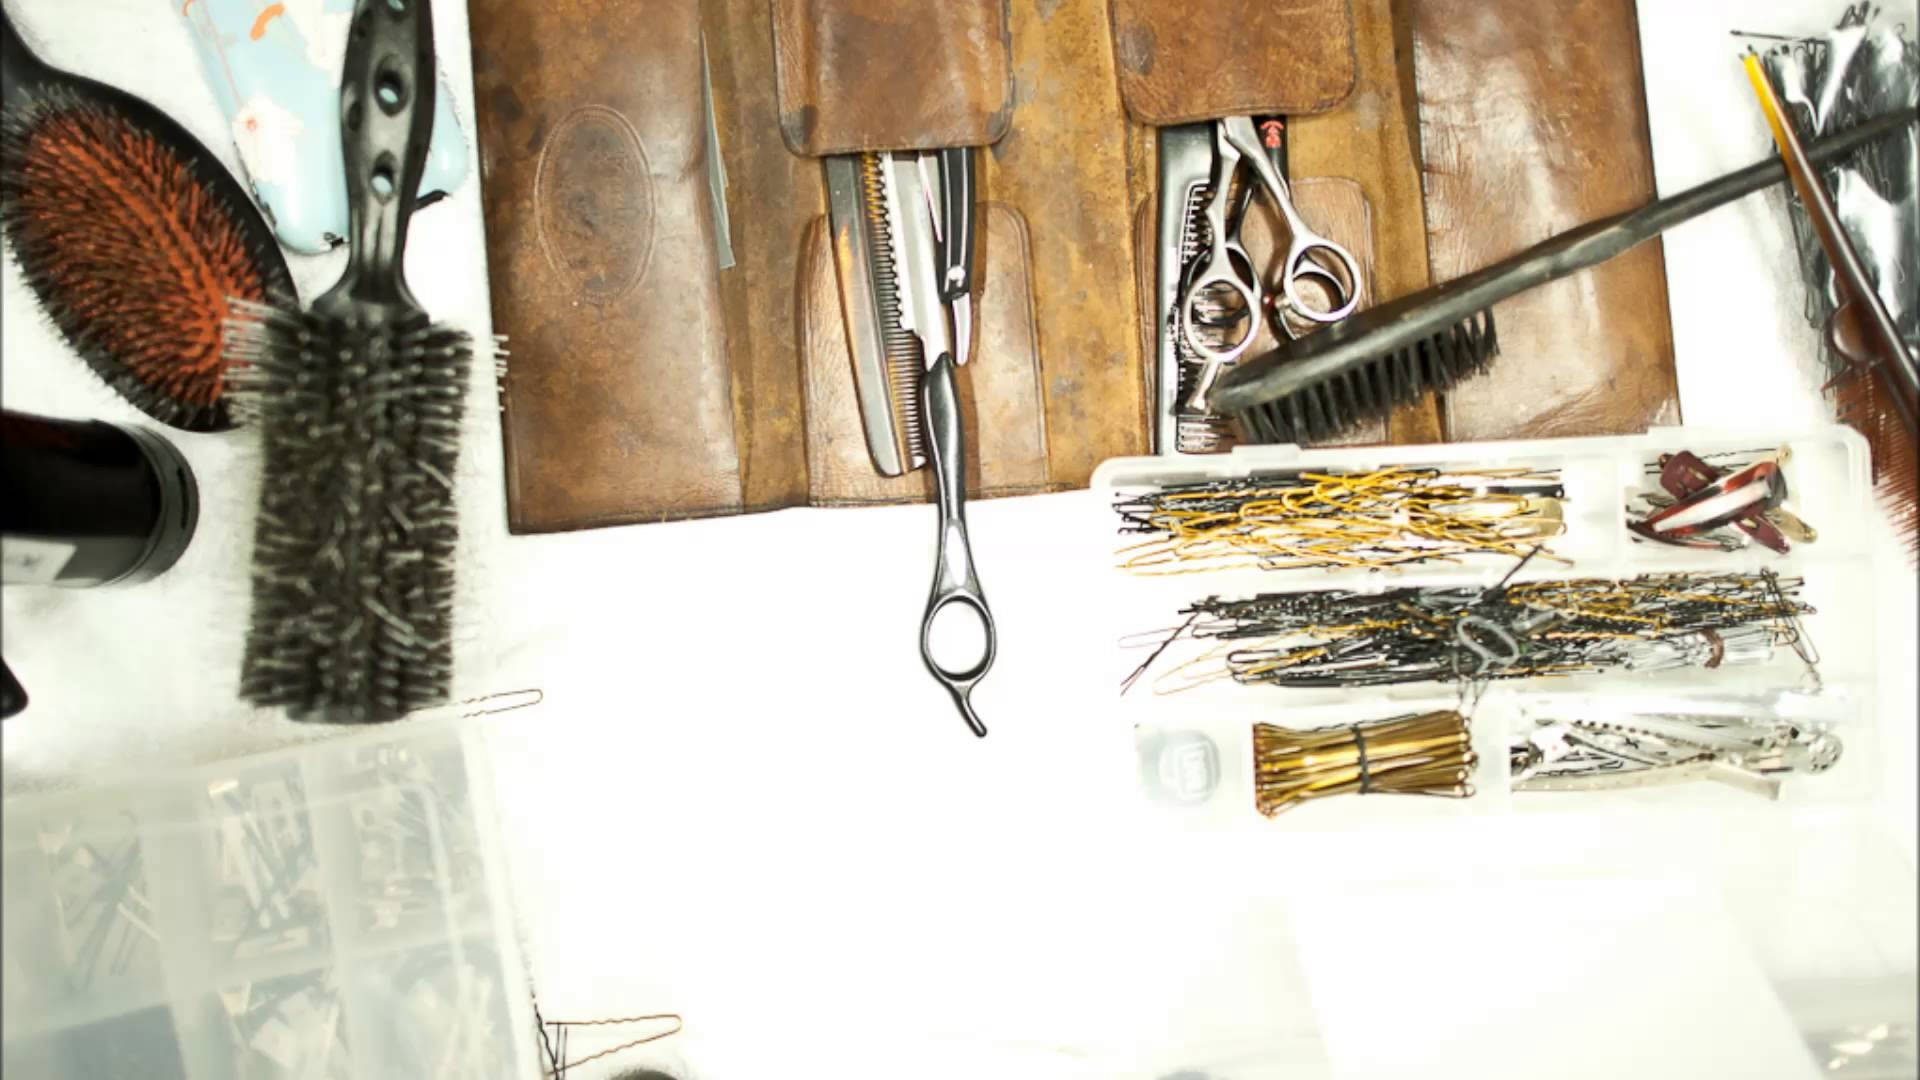 Haircut Tools In Leather Bag Background